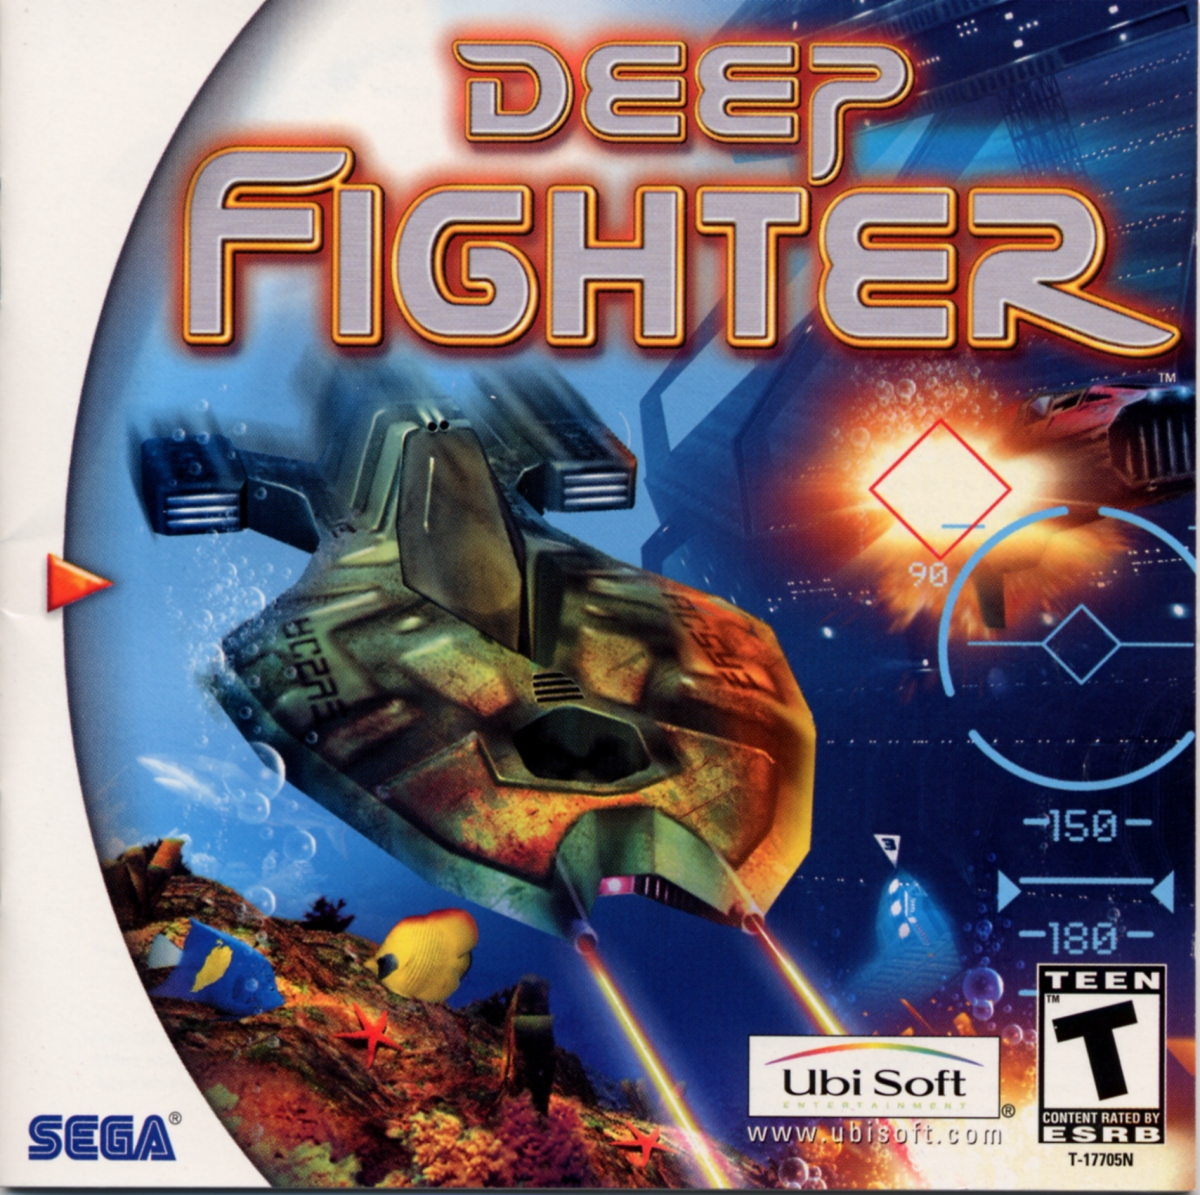 The coverart image of Deep Fighter